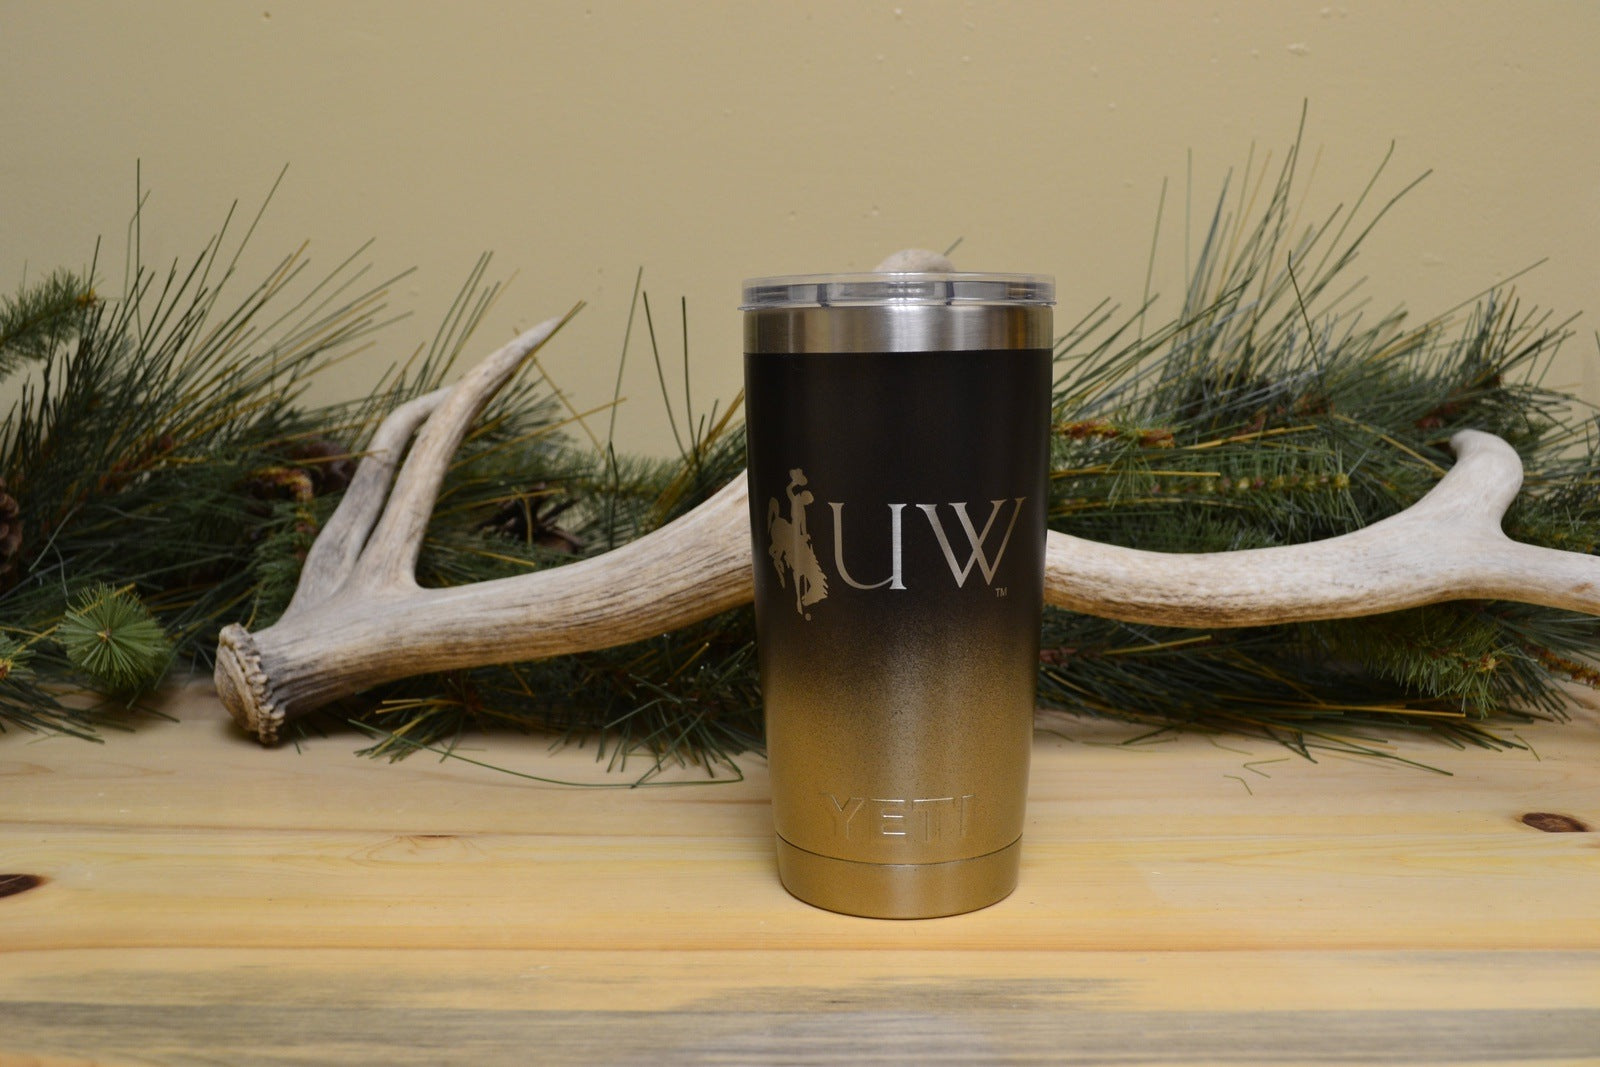 YETI Stainless Steel Tumbler Laser Engraved 20 or 30 Oz, Colsters and  Bottles Select Your University, Personalized, Select Color 